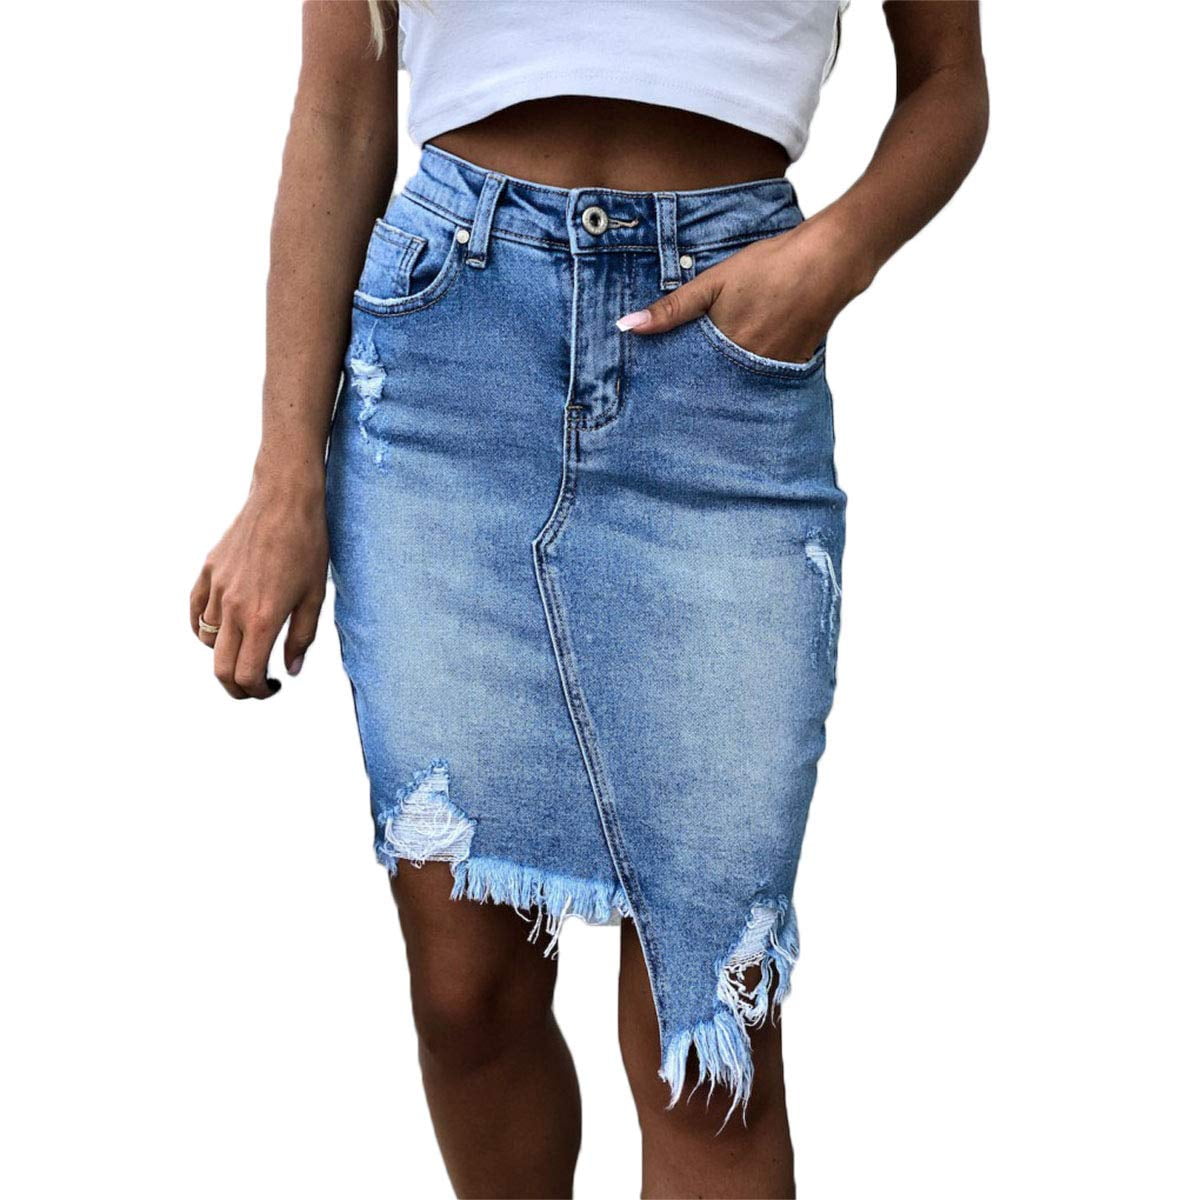 long blue jean skirts for sale